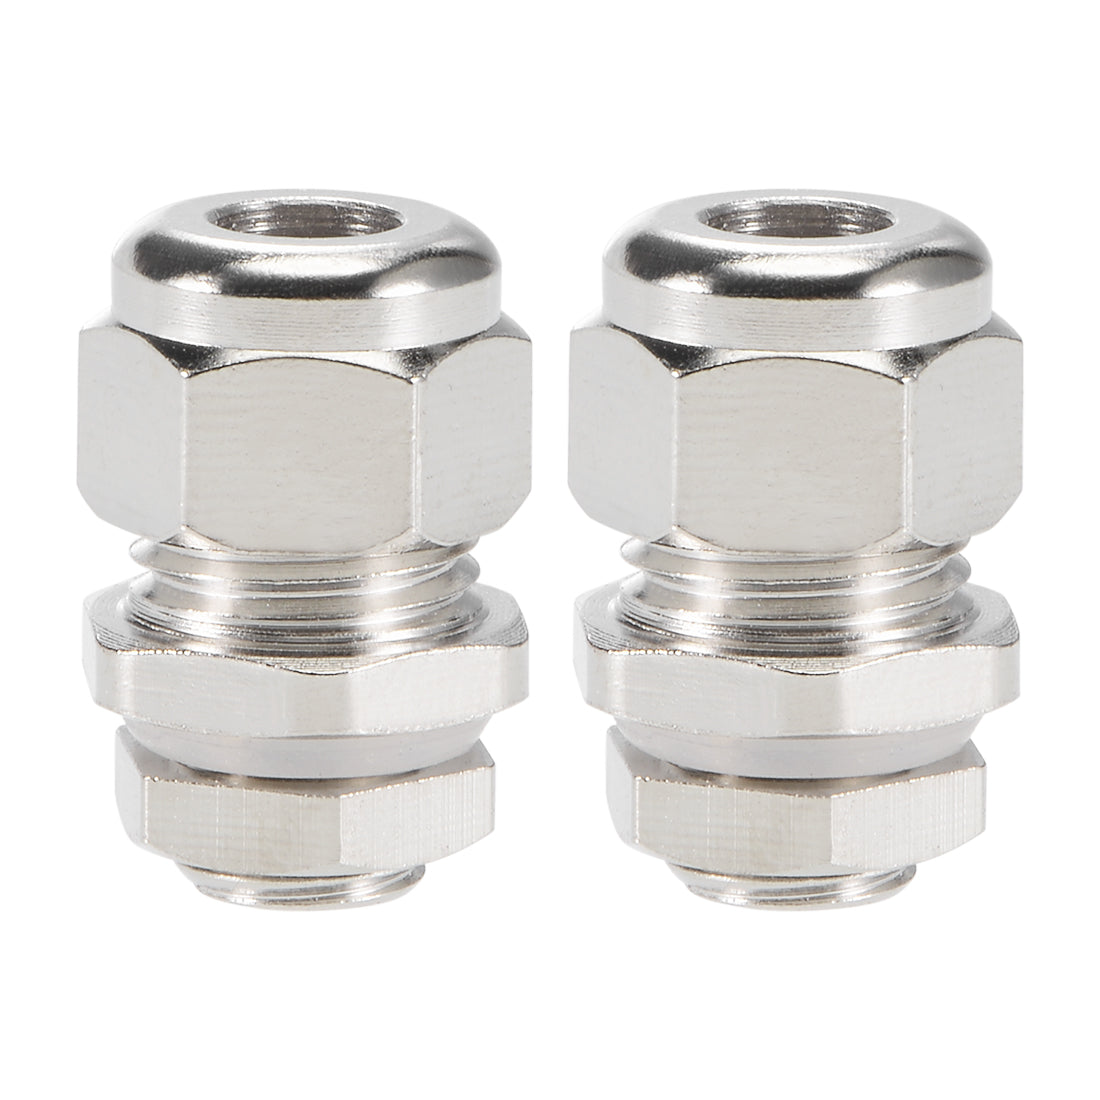 Uxcell Uxcell M8x1.25 Cable Gland 5mm-7mm Wire Hole Waterproof Metal Joint Adjustable Locknut with Washer 2pcs